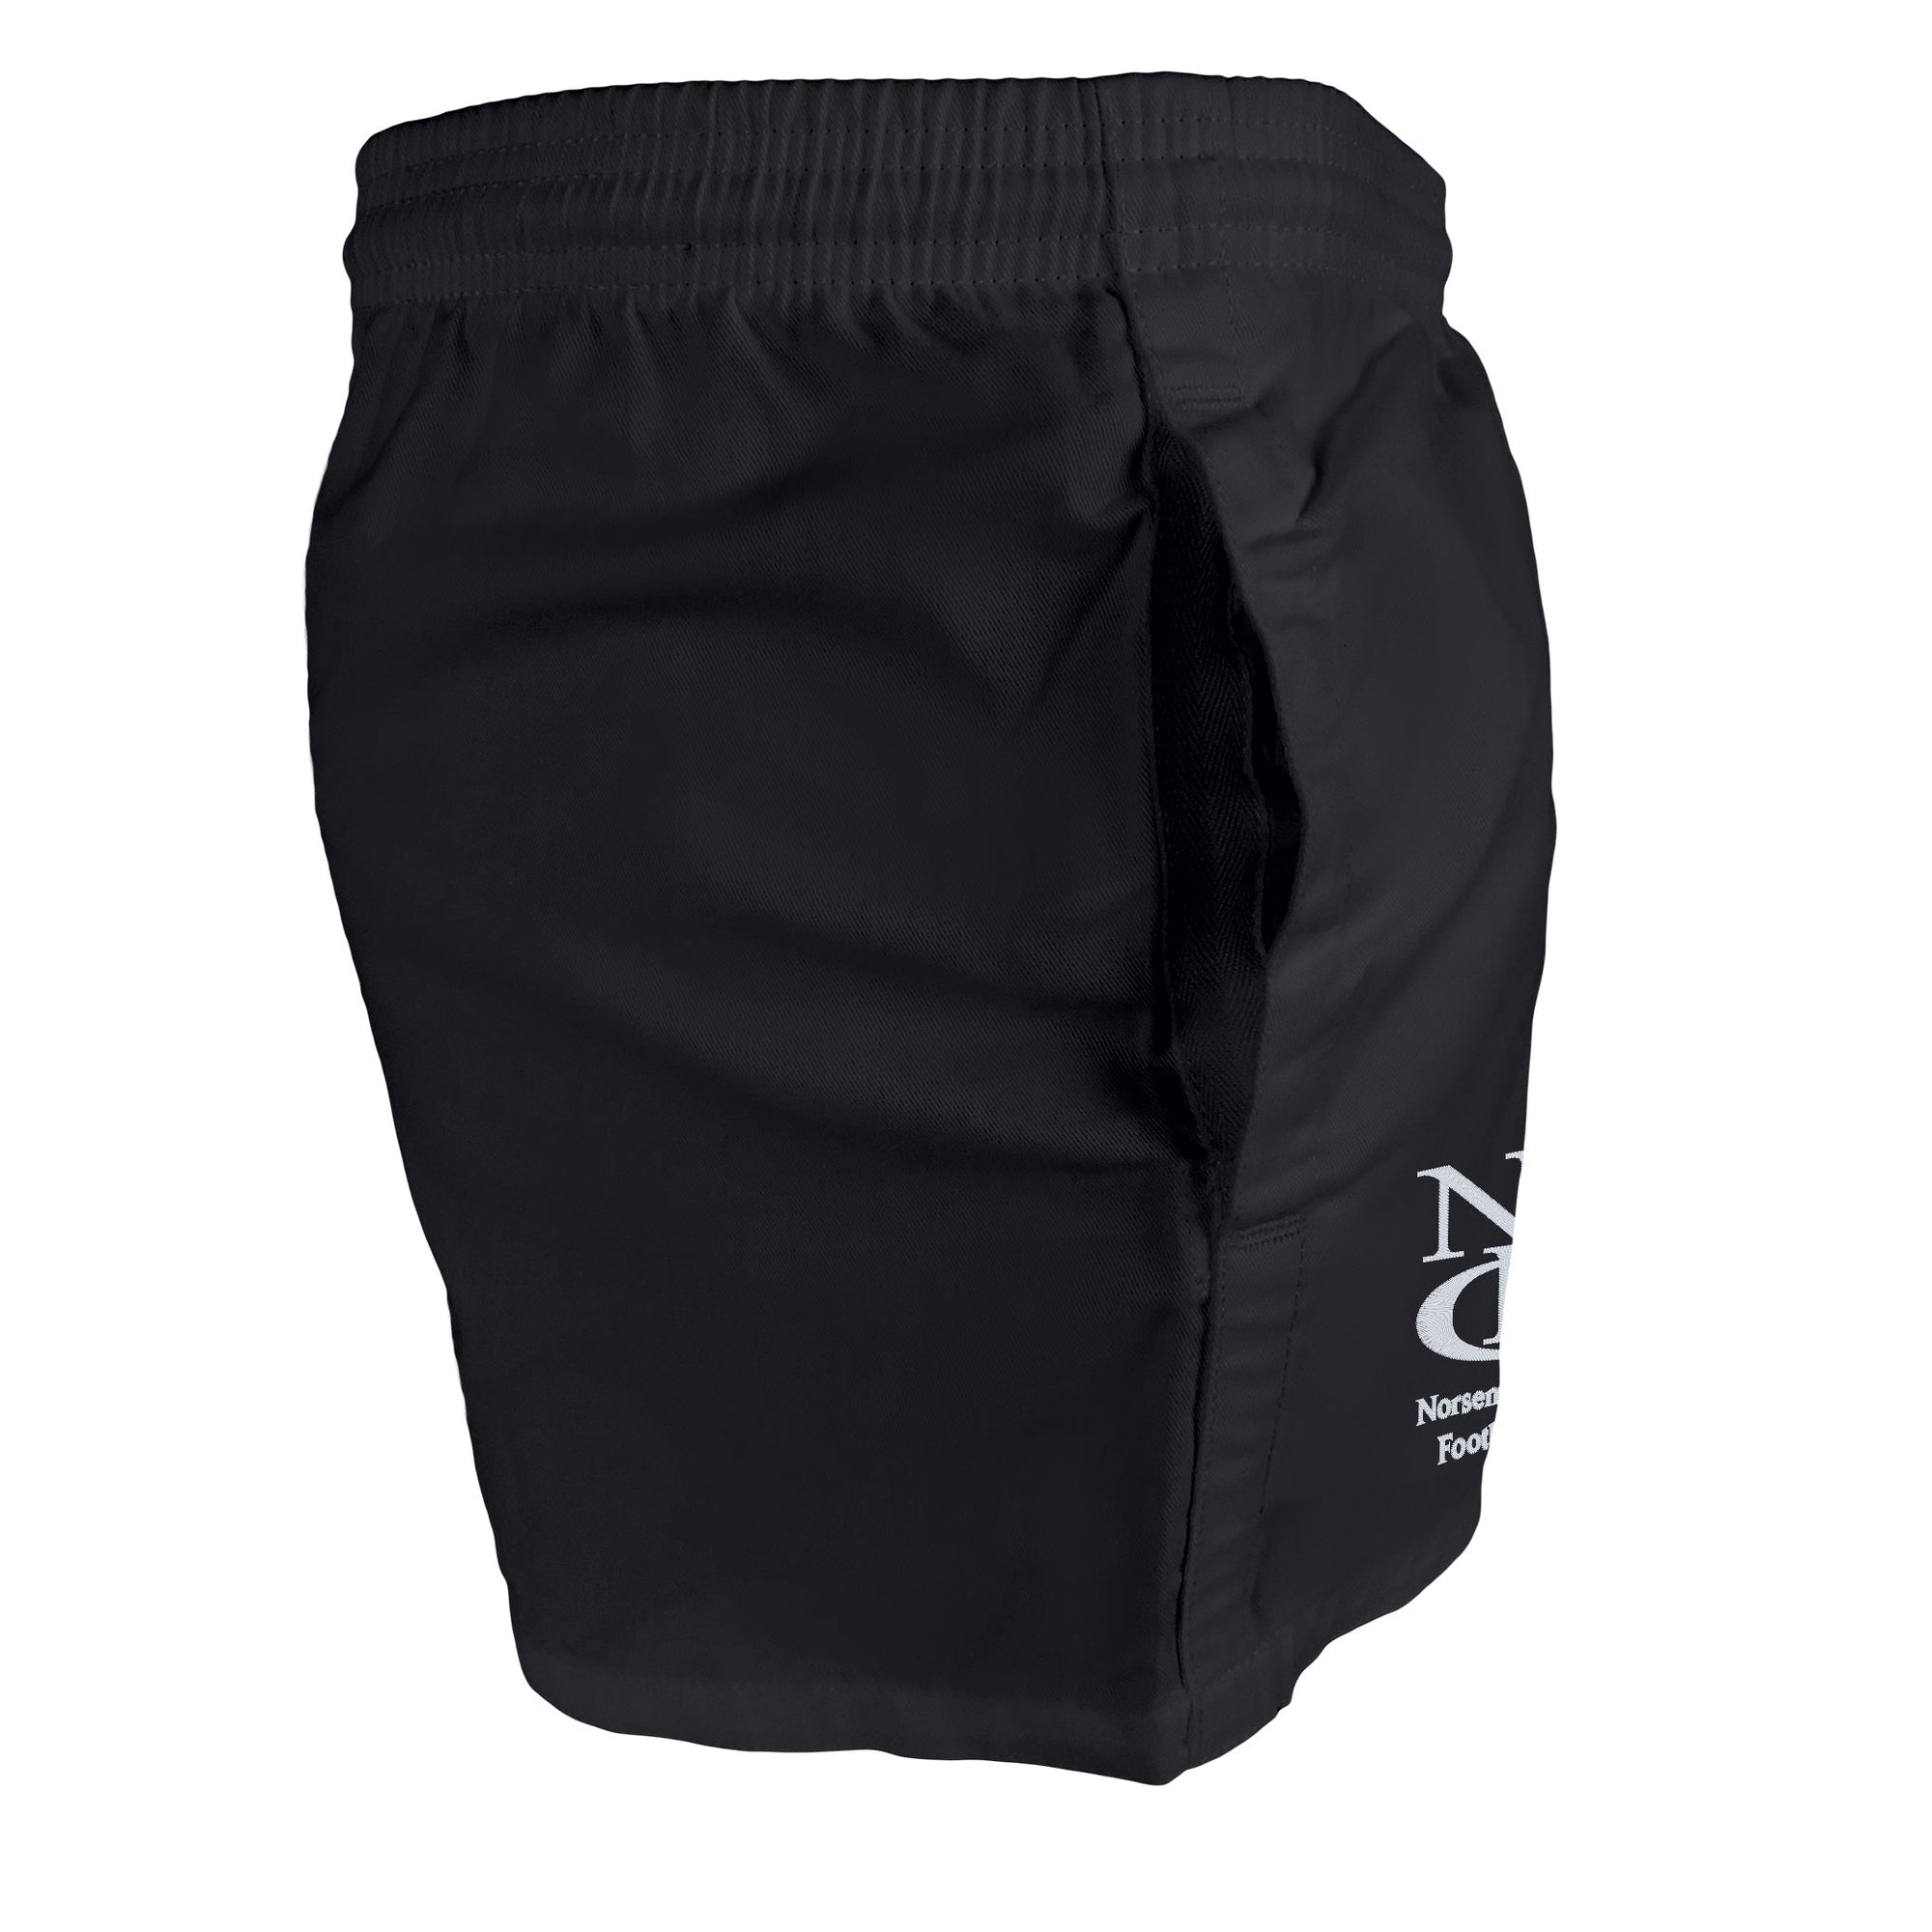 Rugby Imports Norsemen RFC Kiwi Pro Rugby Shorts